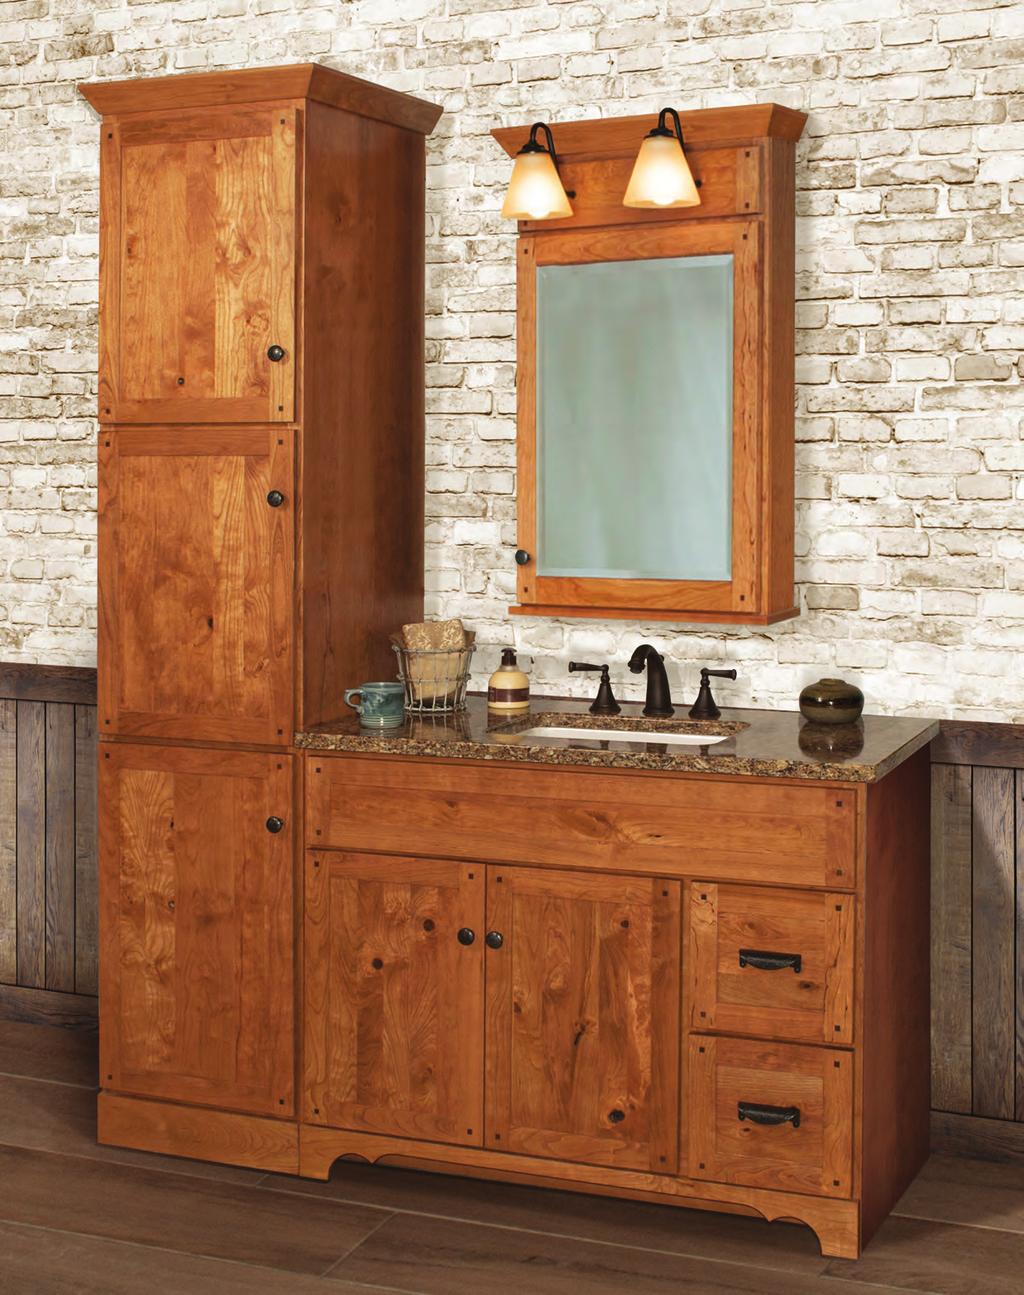 Valencia The Valencia Collection emphasizes the craftsman, or arts and crafts, style. Cherry Rustic wood species is a popular choice in this collection.